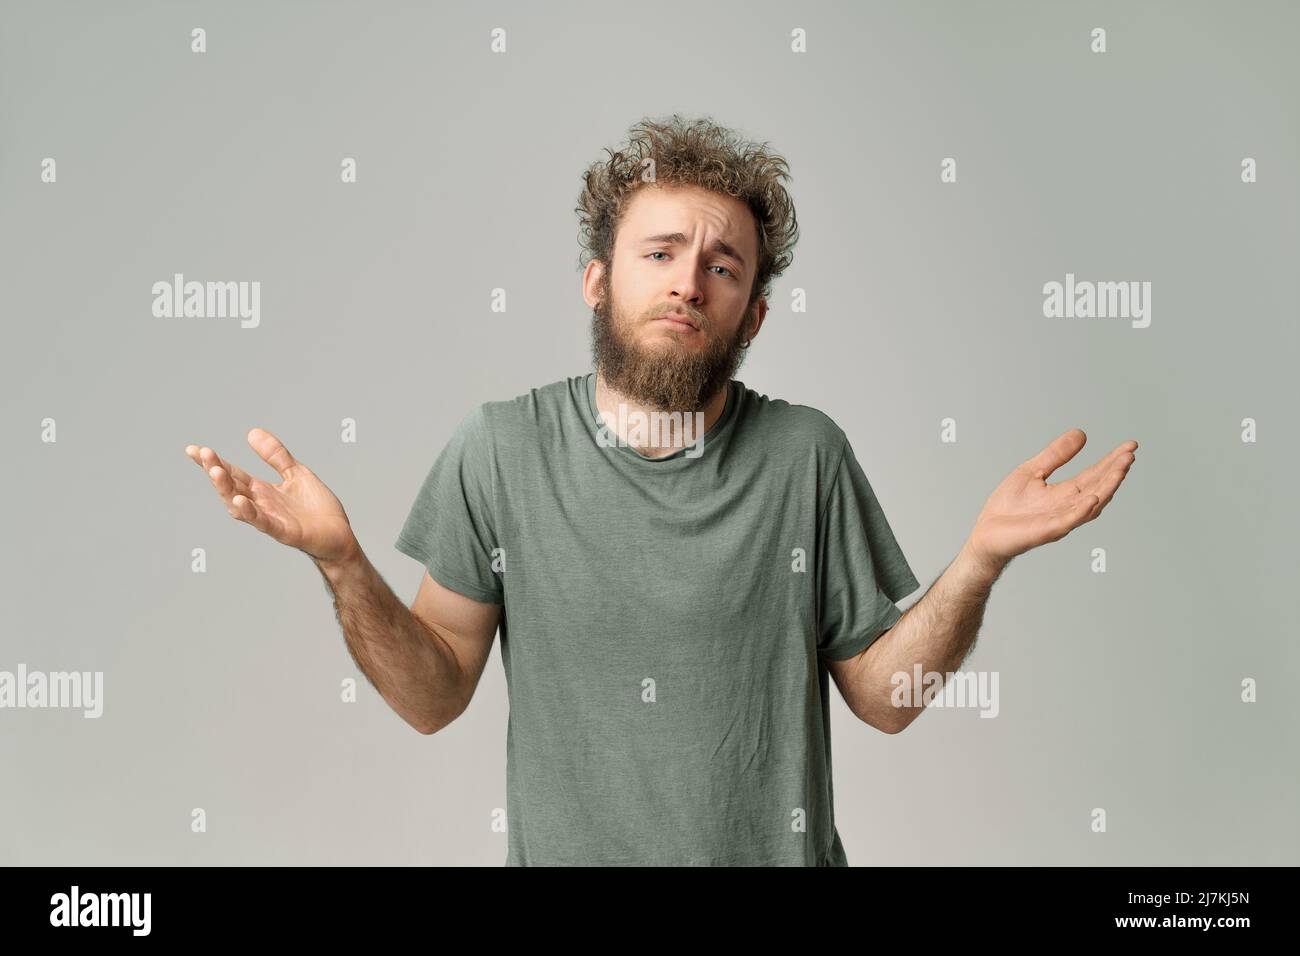 Gesturing I DONT KNOW or I AM SORRY young handsome bearded wild curly hair man with bright blue eyes isolated on grey background. Young thinking man in green t shirt on white. Copy space.  Stock Photo